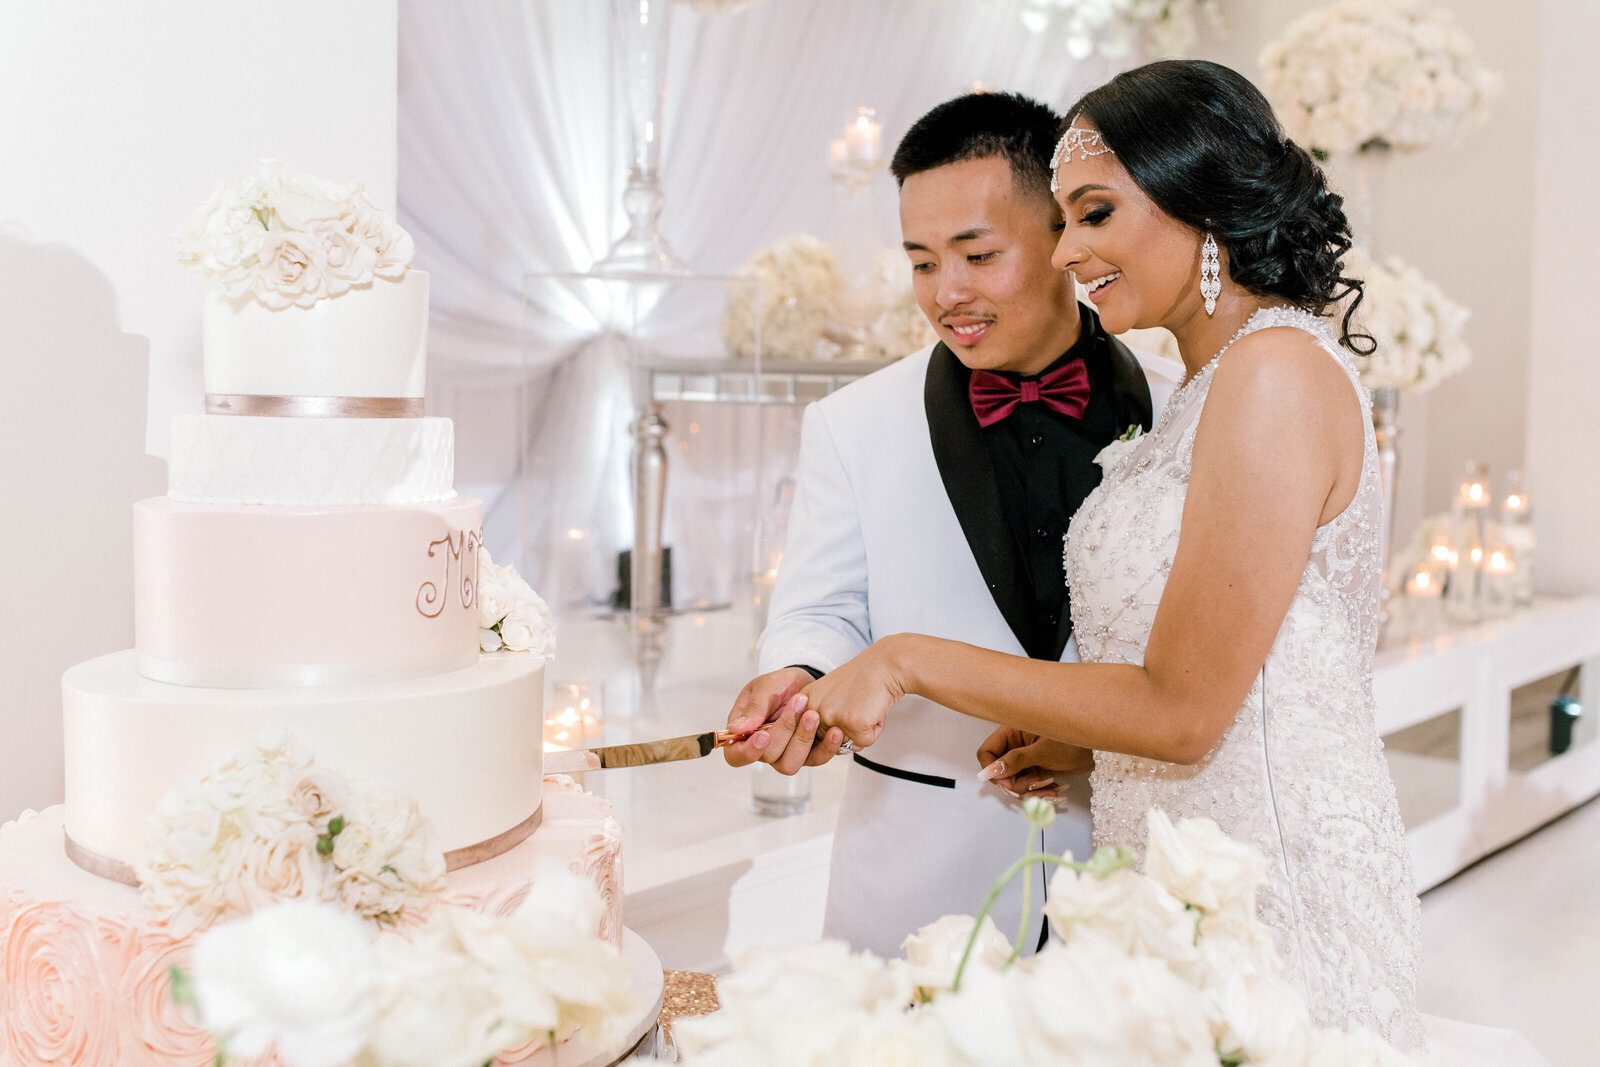 Bride and groom cutting their wedding cake together